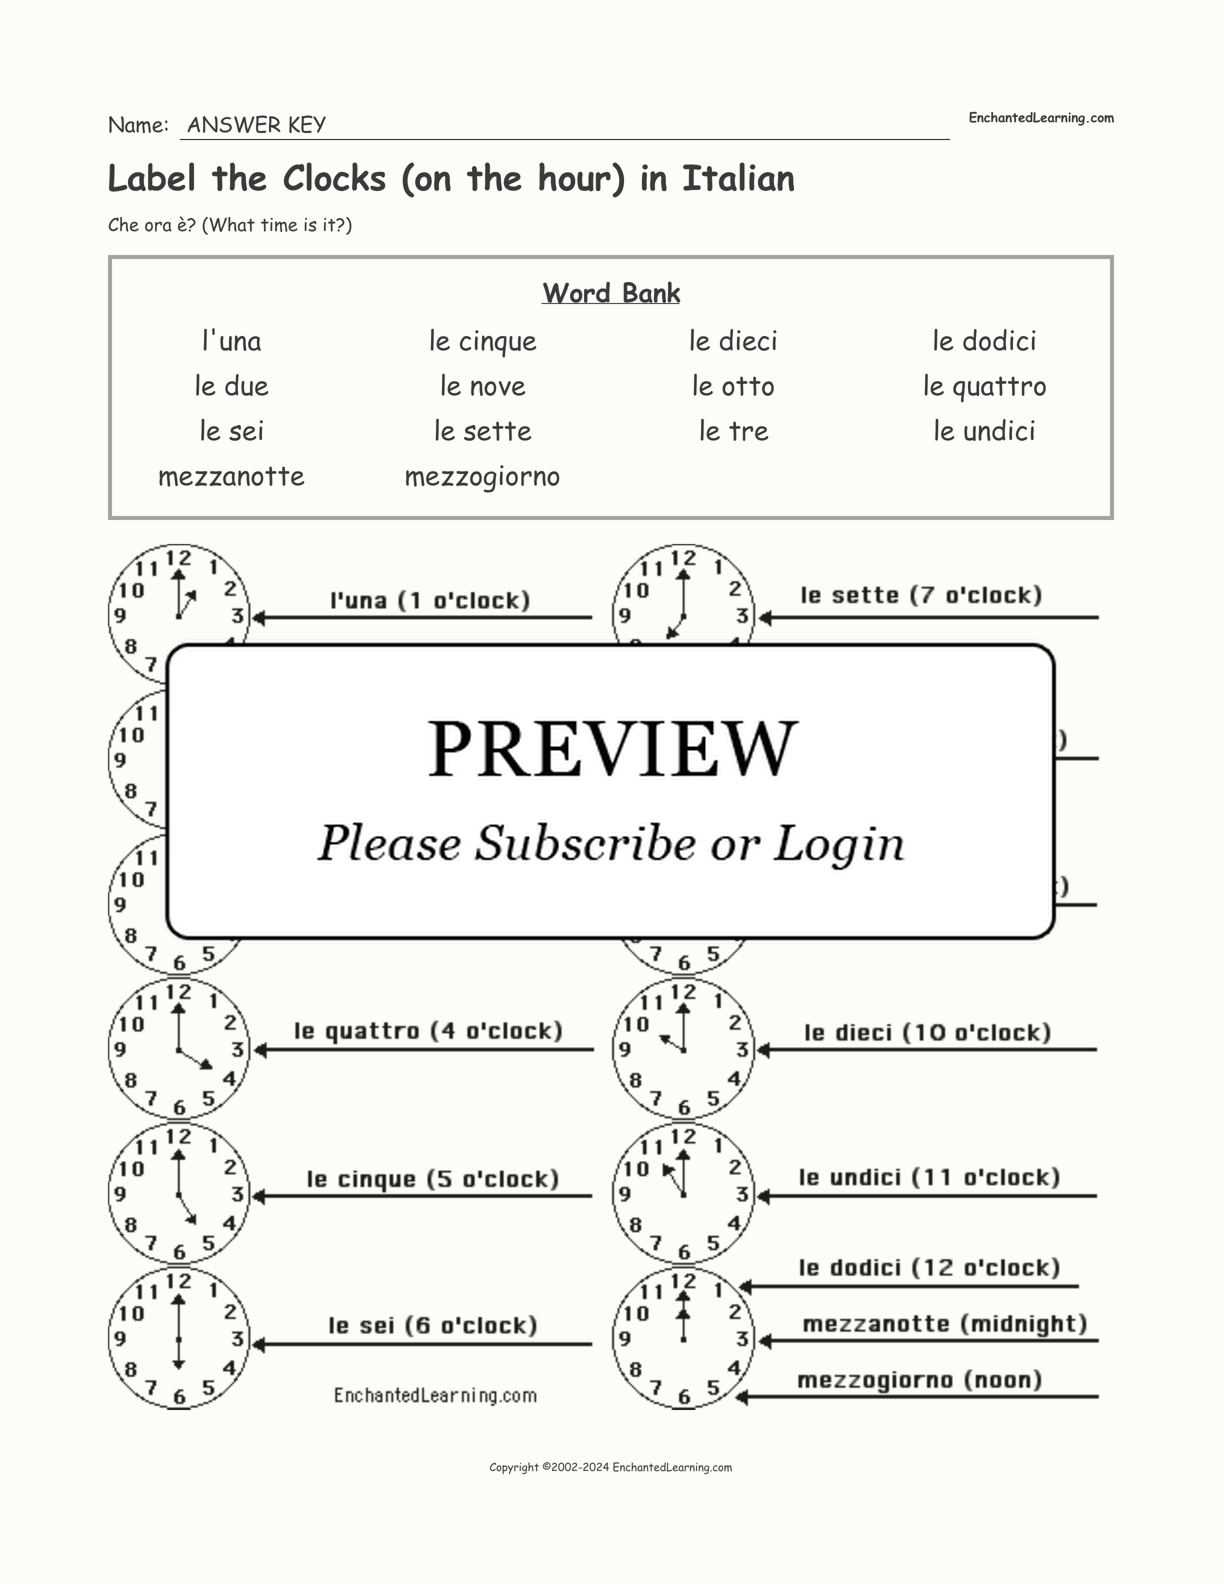 Label the Clocks (on the hour) in Italian interactive worksheet page 2